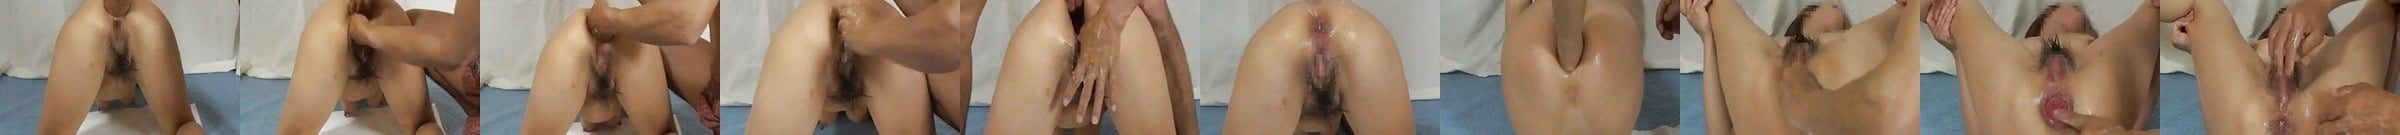 Asian Fisting Porn Videos Xhamster